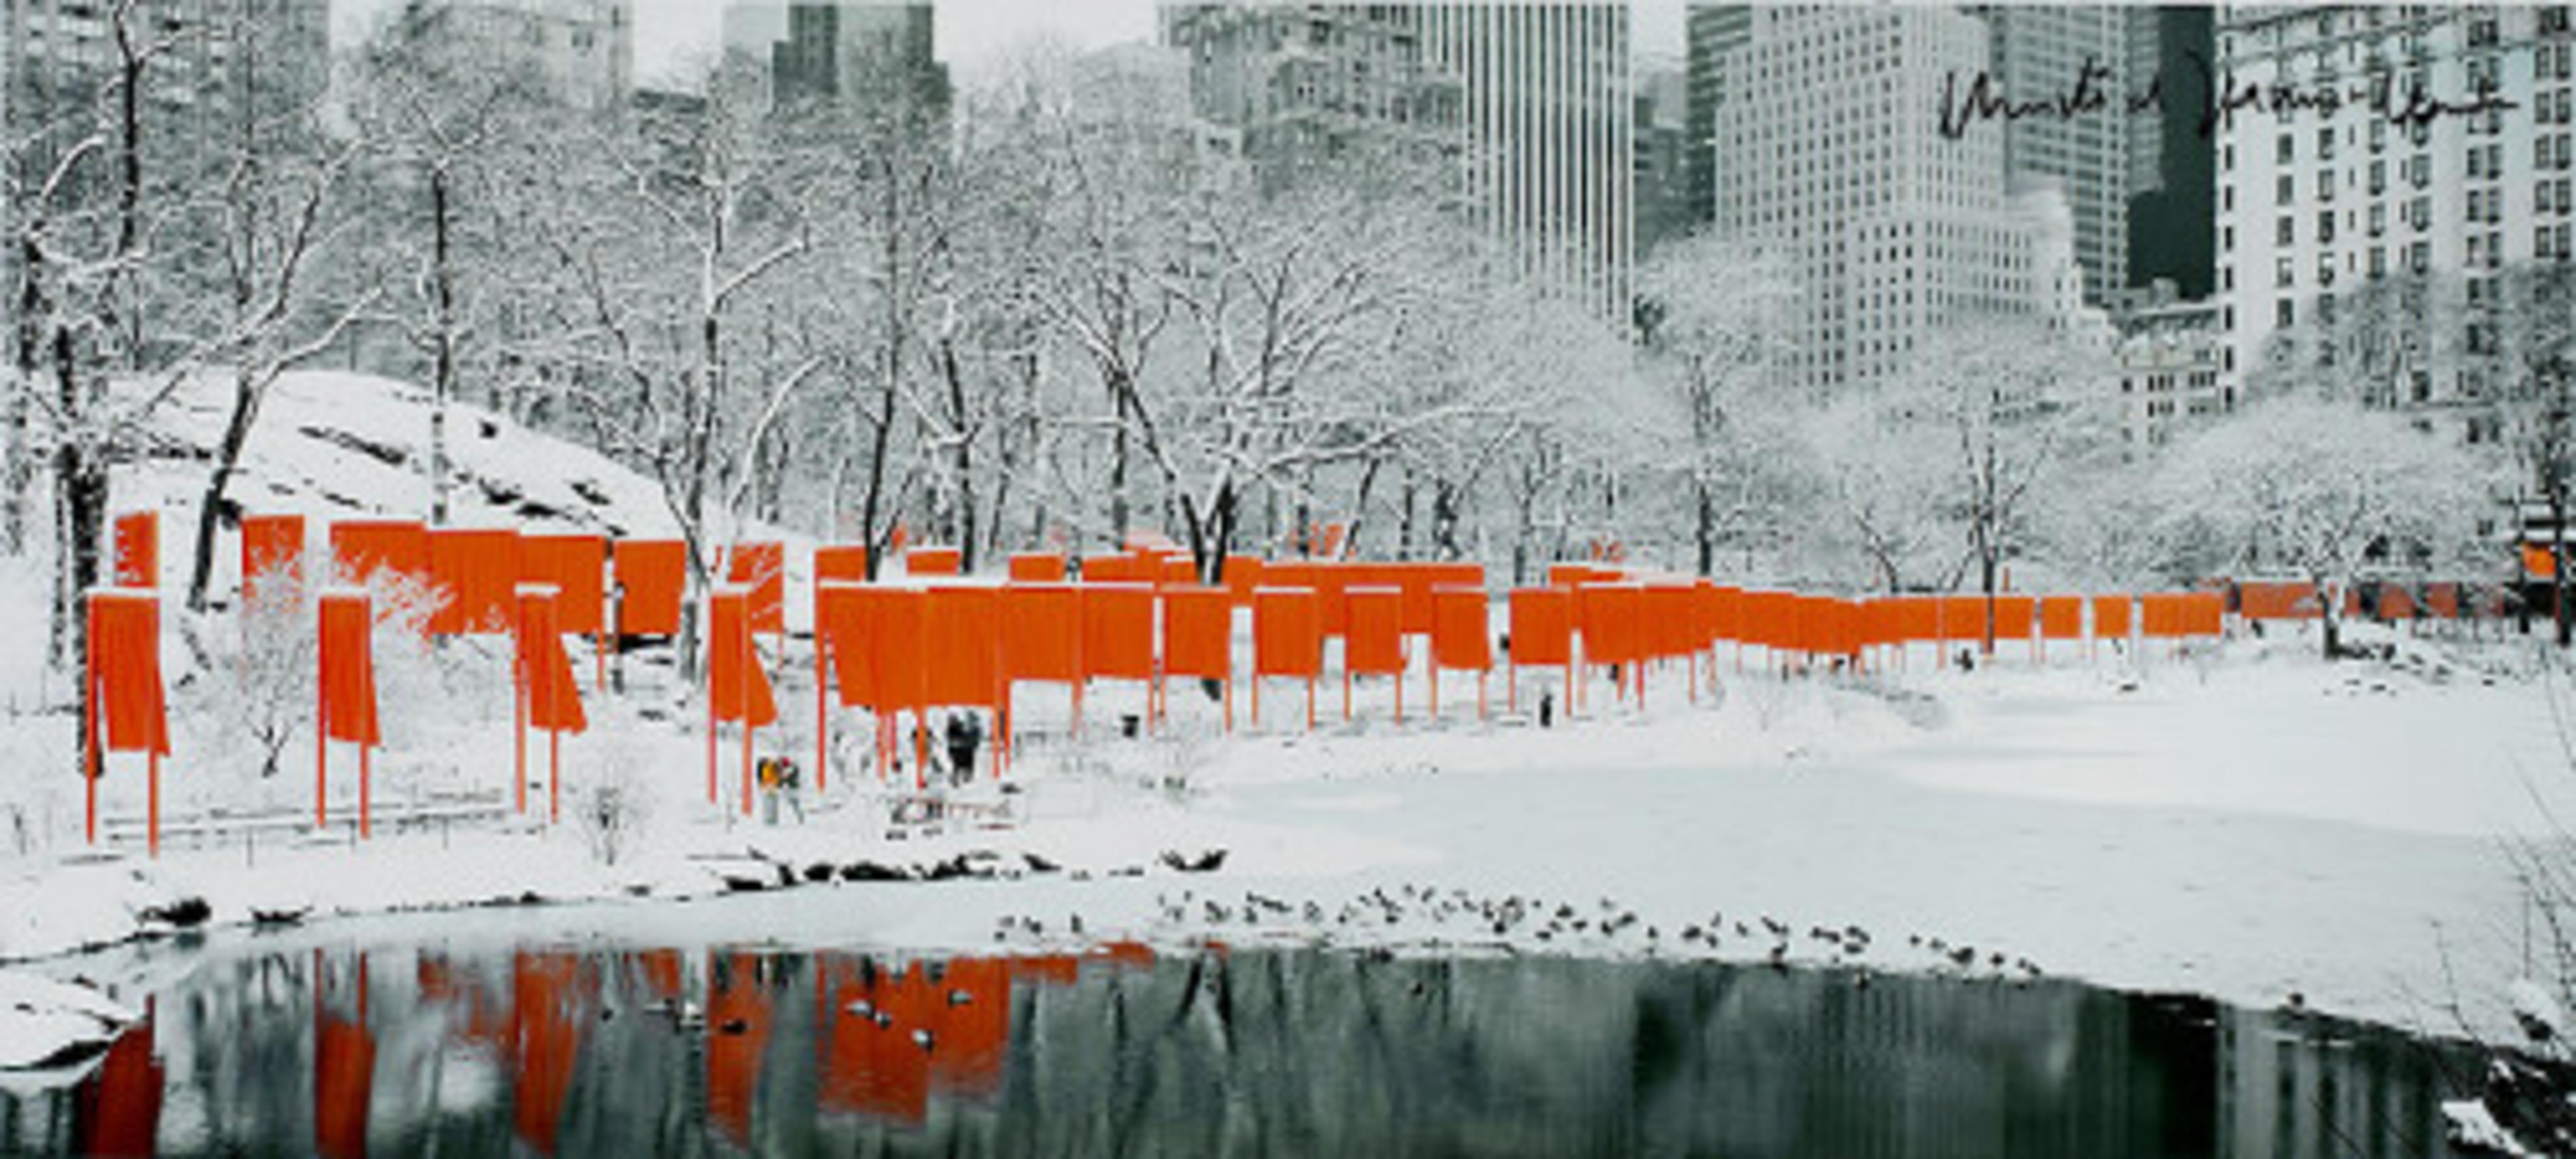 The Gates Skyline in the snow - Photograph by Javacheff Christo